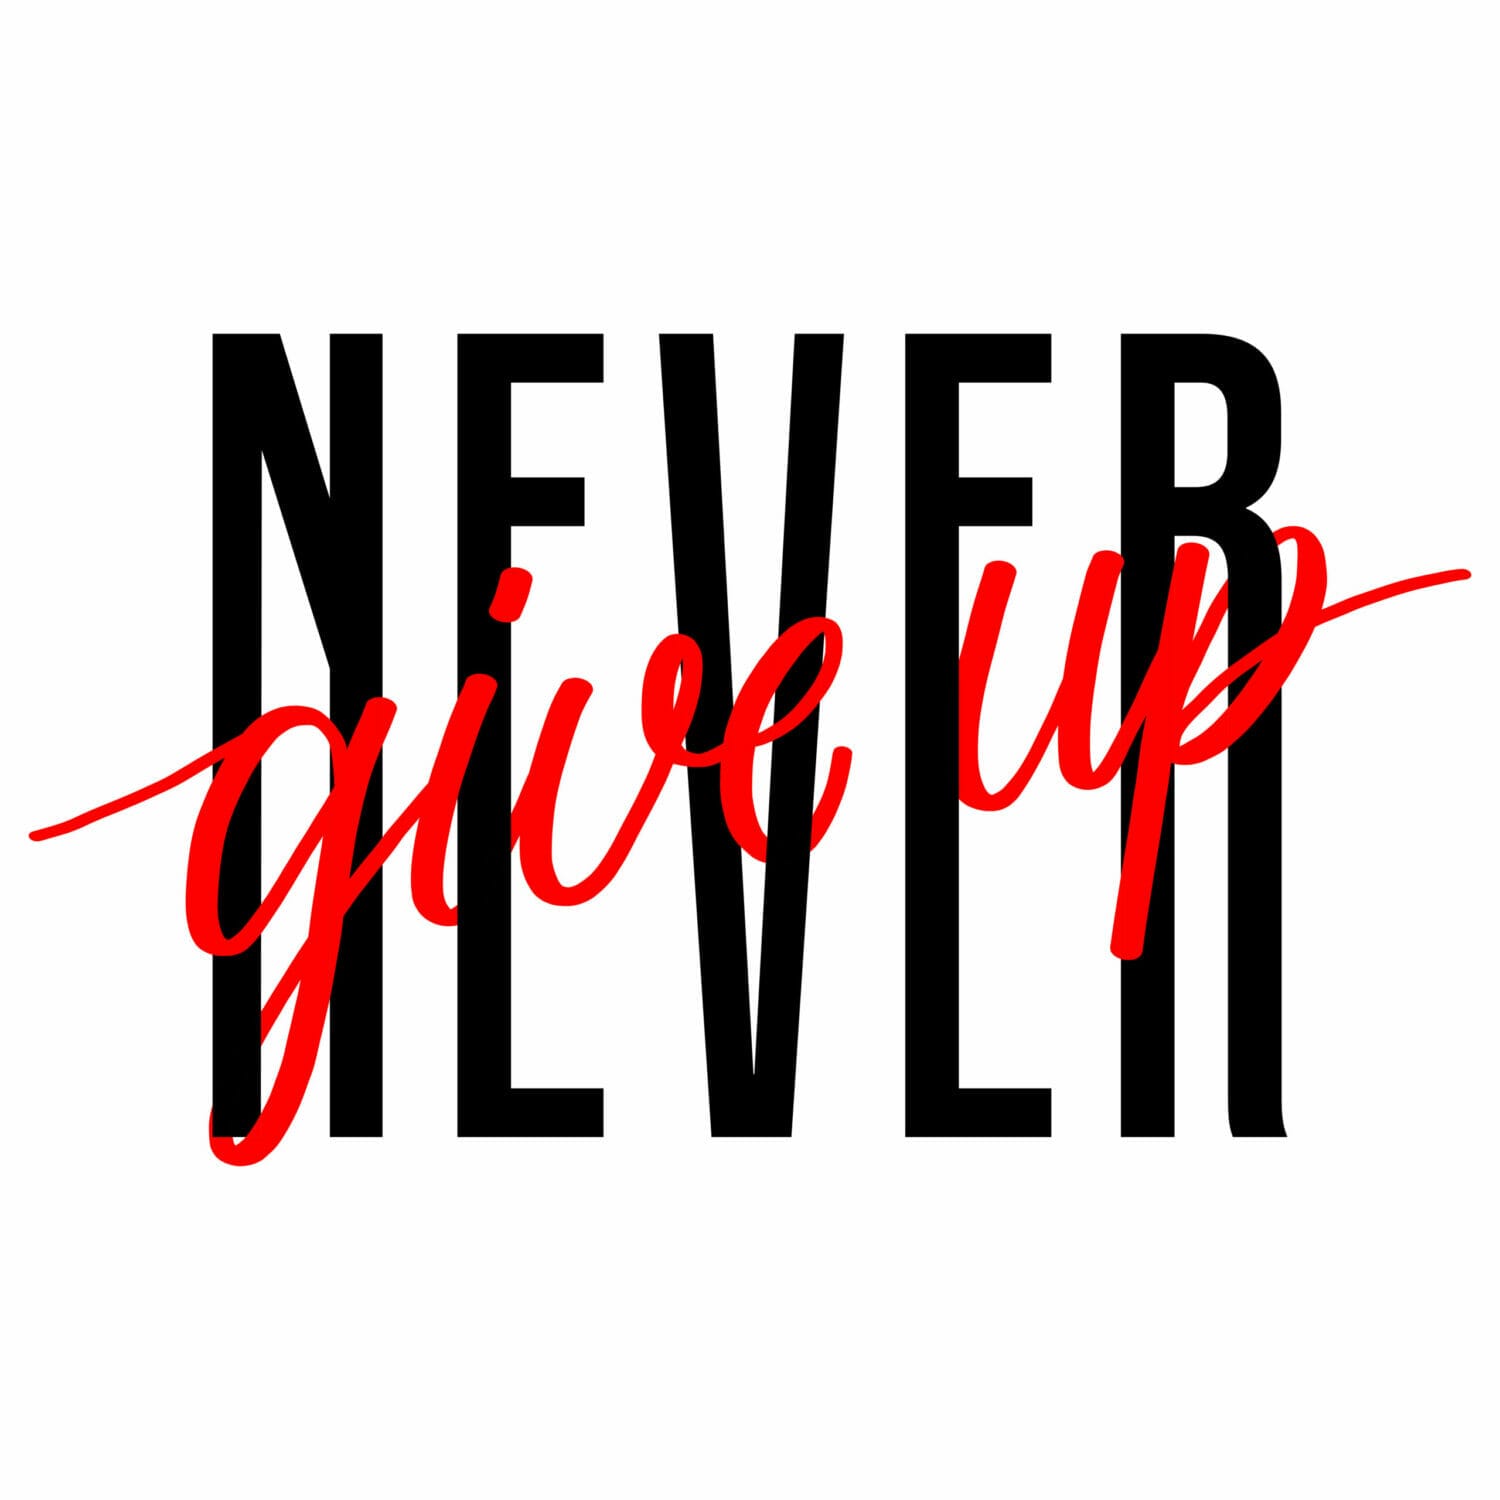 Never-give-up-tshirt-design